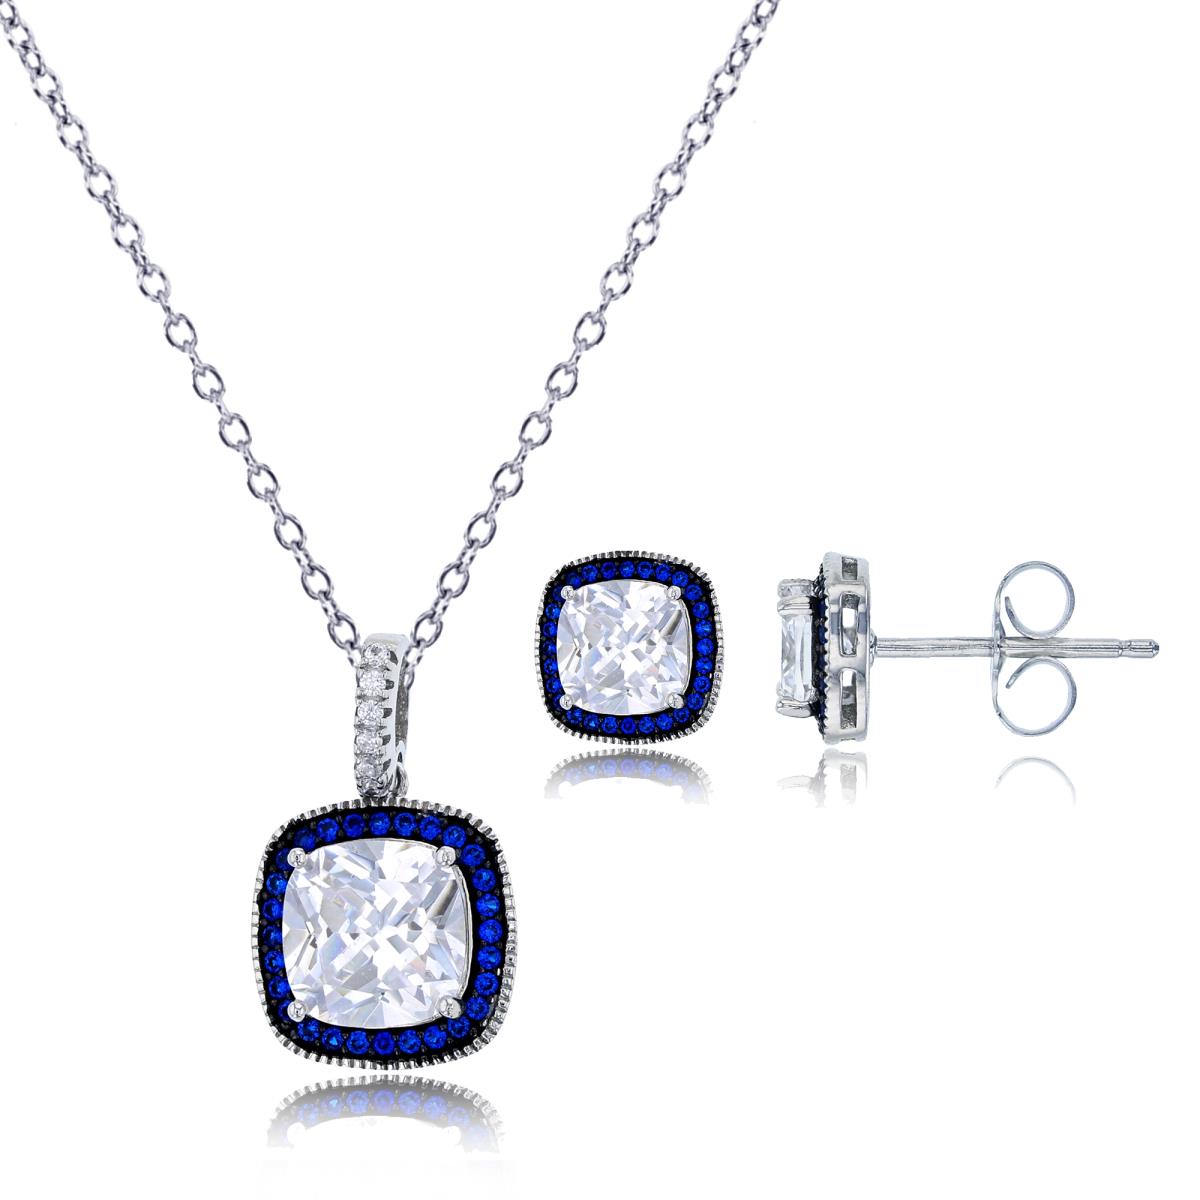 Sterling Silver Black & White 8mm White Cushion Cut CZ Sapphire Halo 18" Necklace & Earring Set